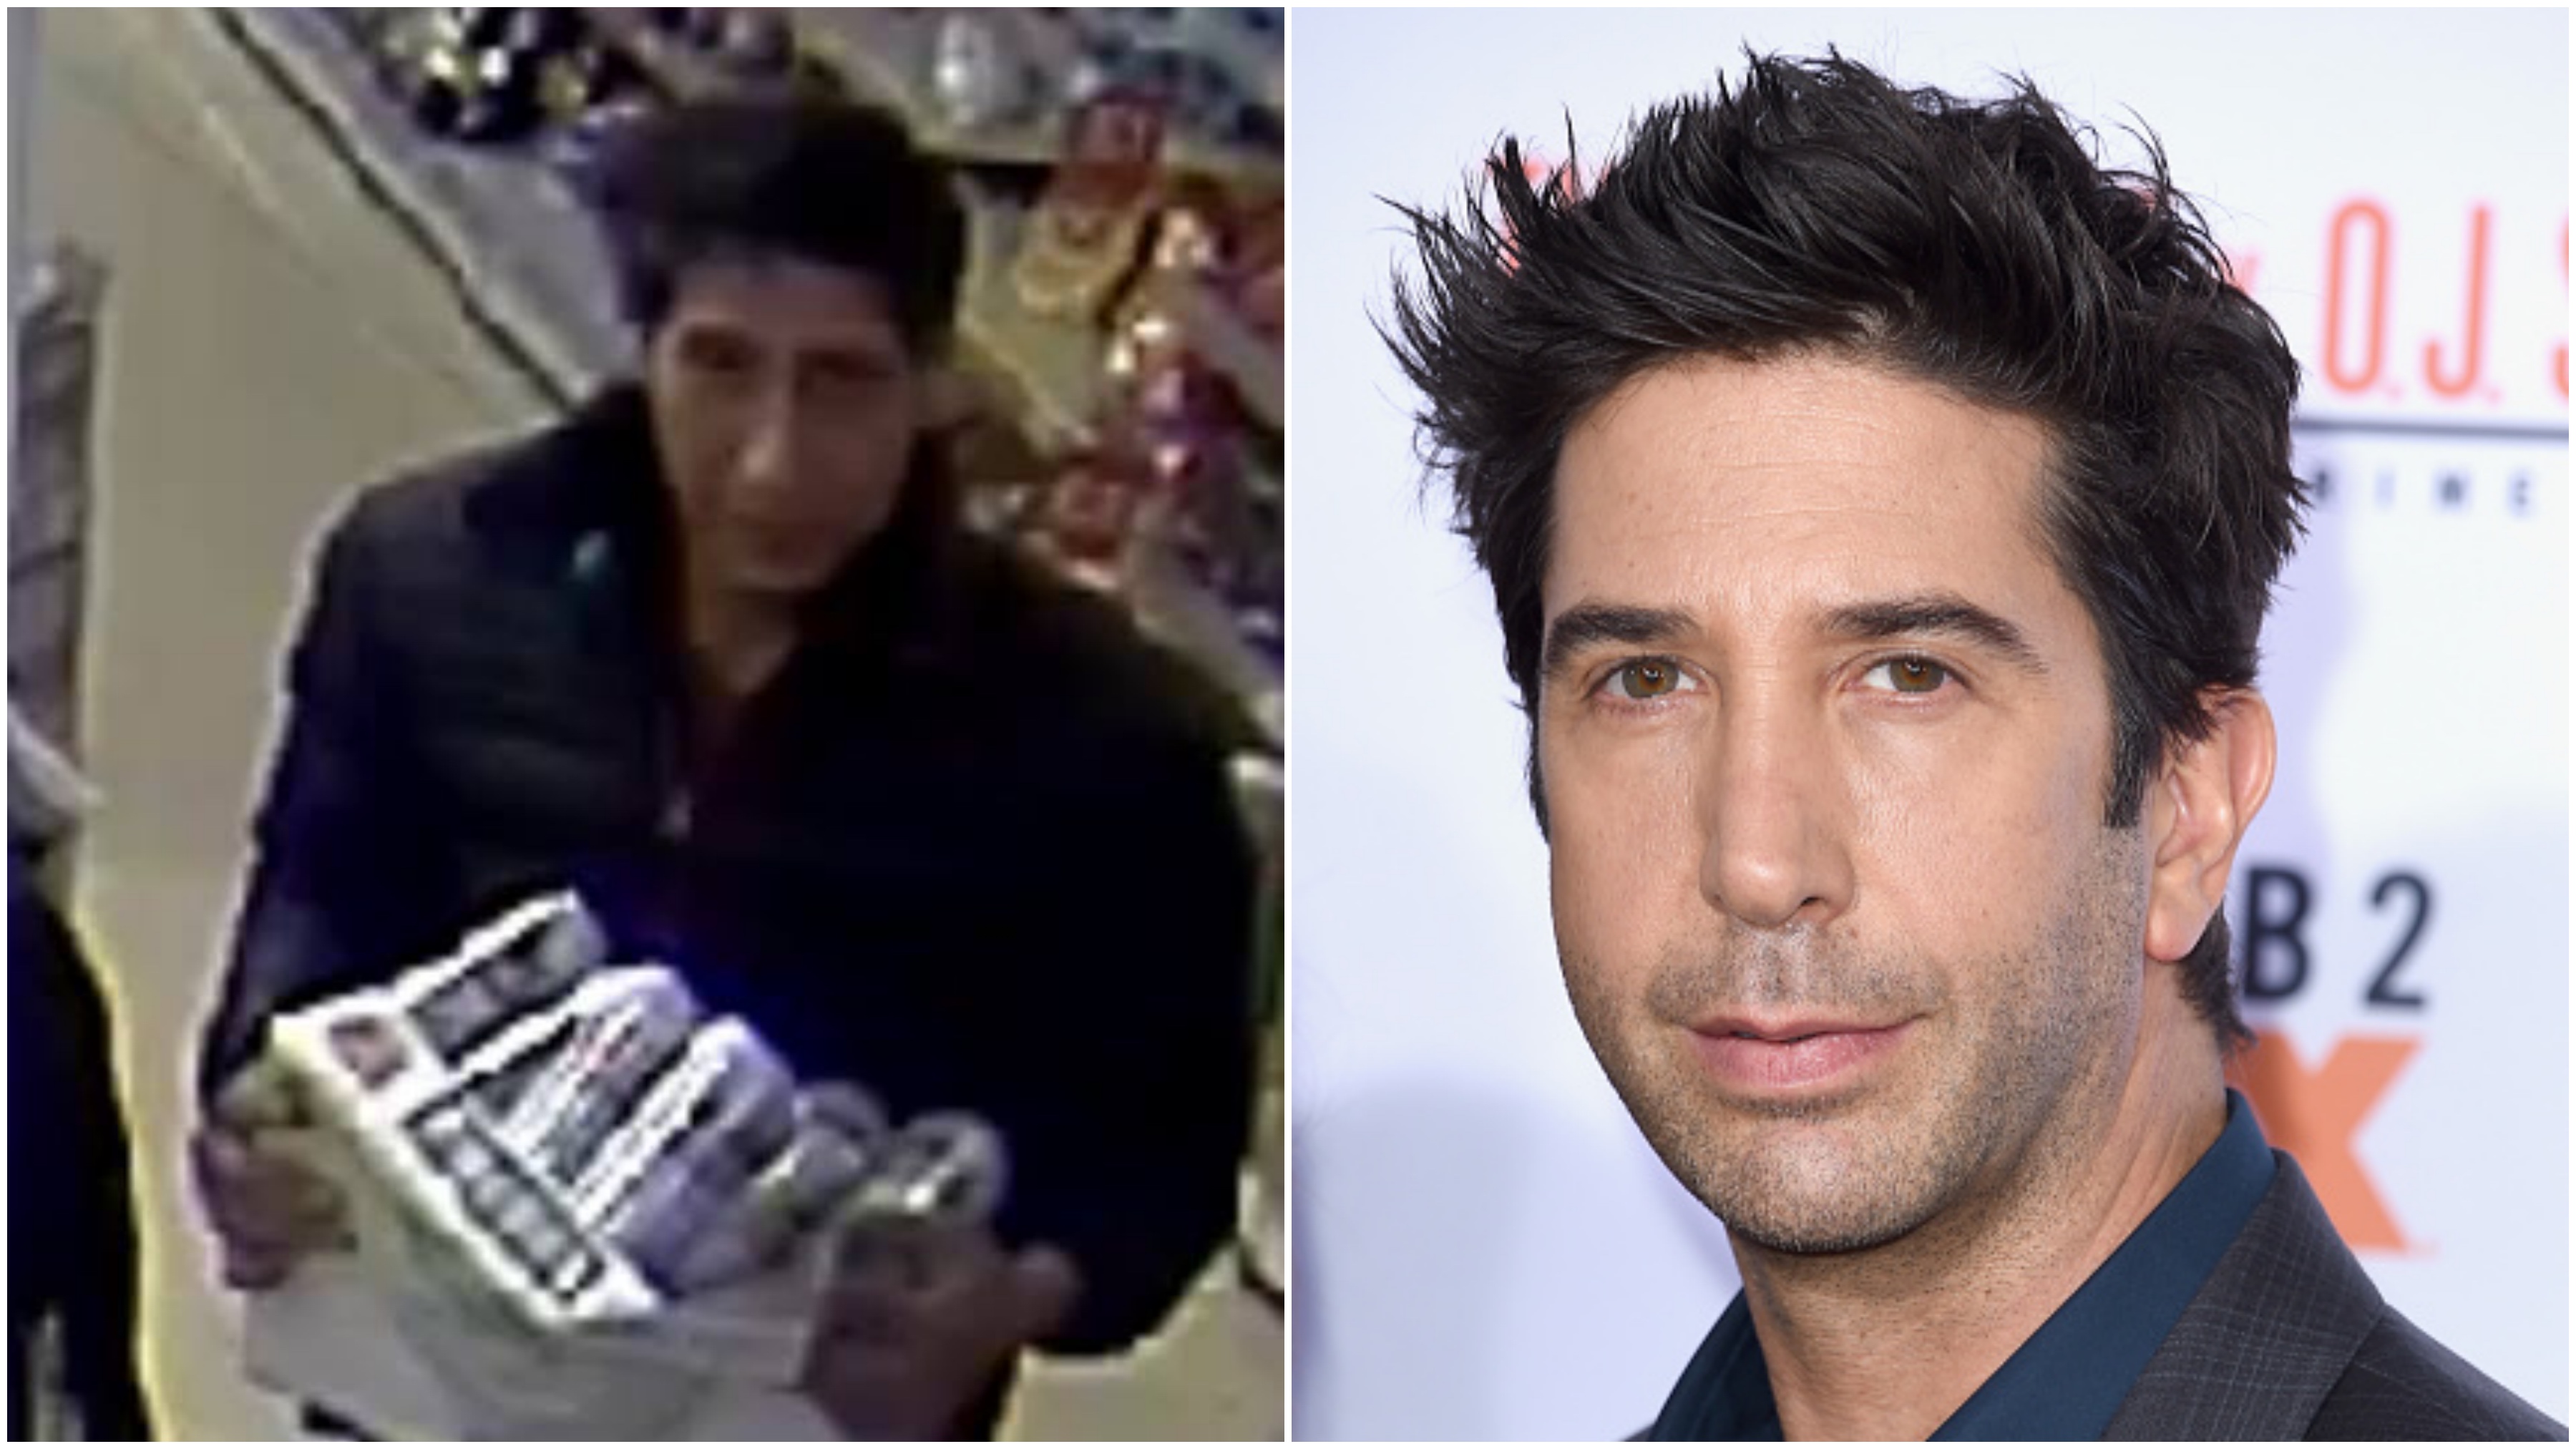 David Schwimmer lookalike wanted for theft finally arrested. 